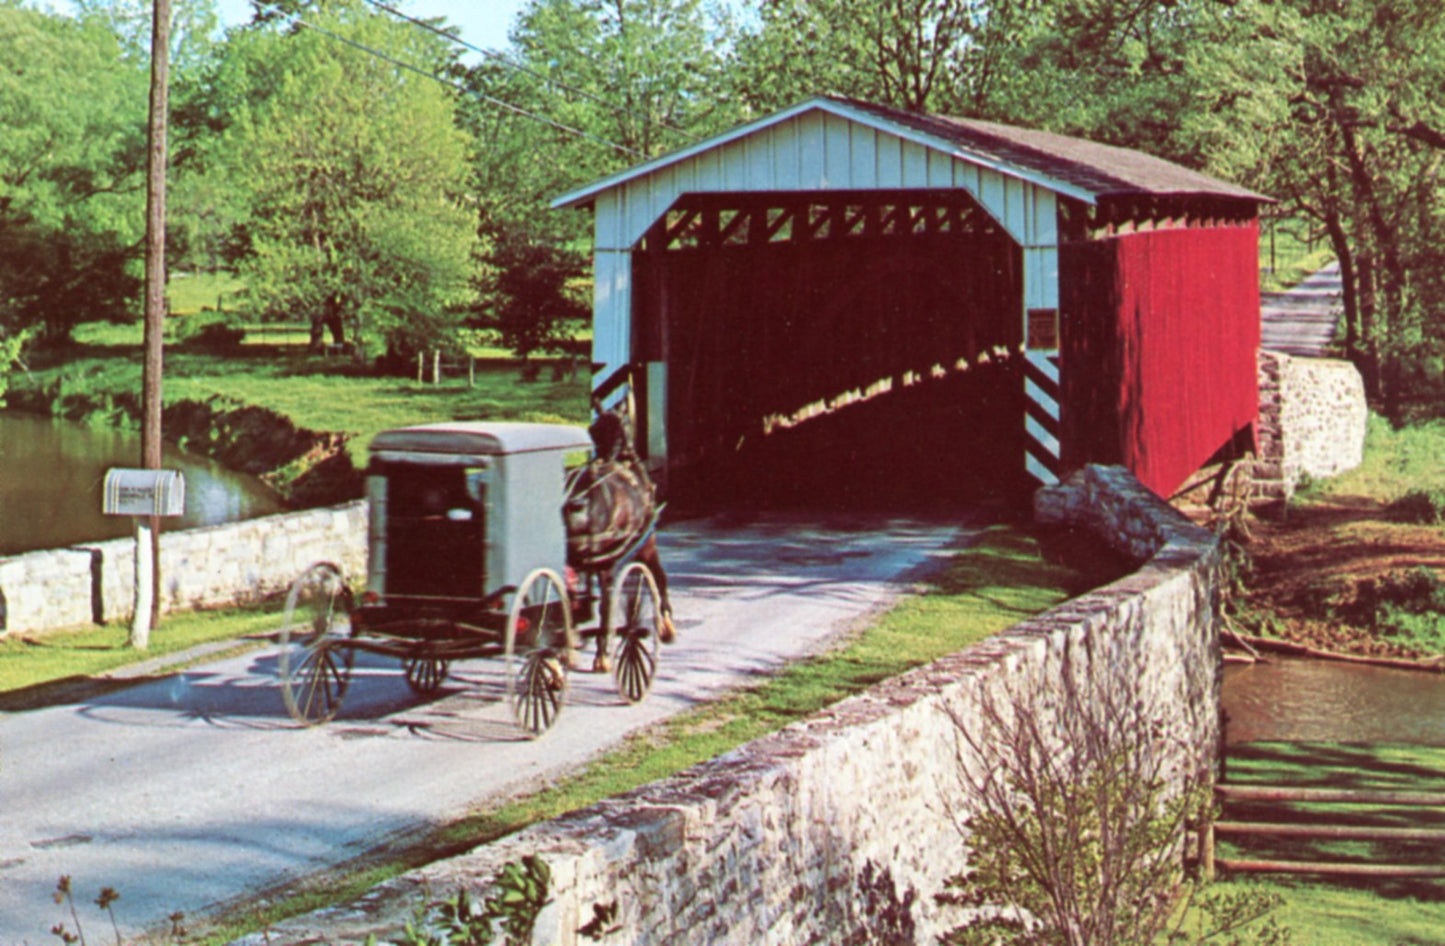 Paradise Covered Bridge and Amish Carriage LANCASTER COUNTY PENNSYLVANIA Vintage Postcard